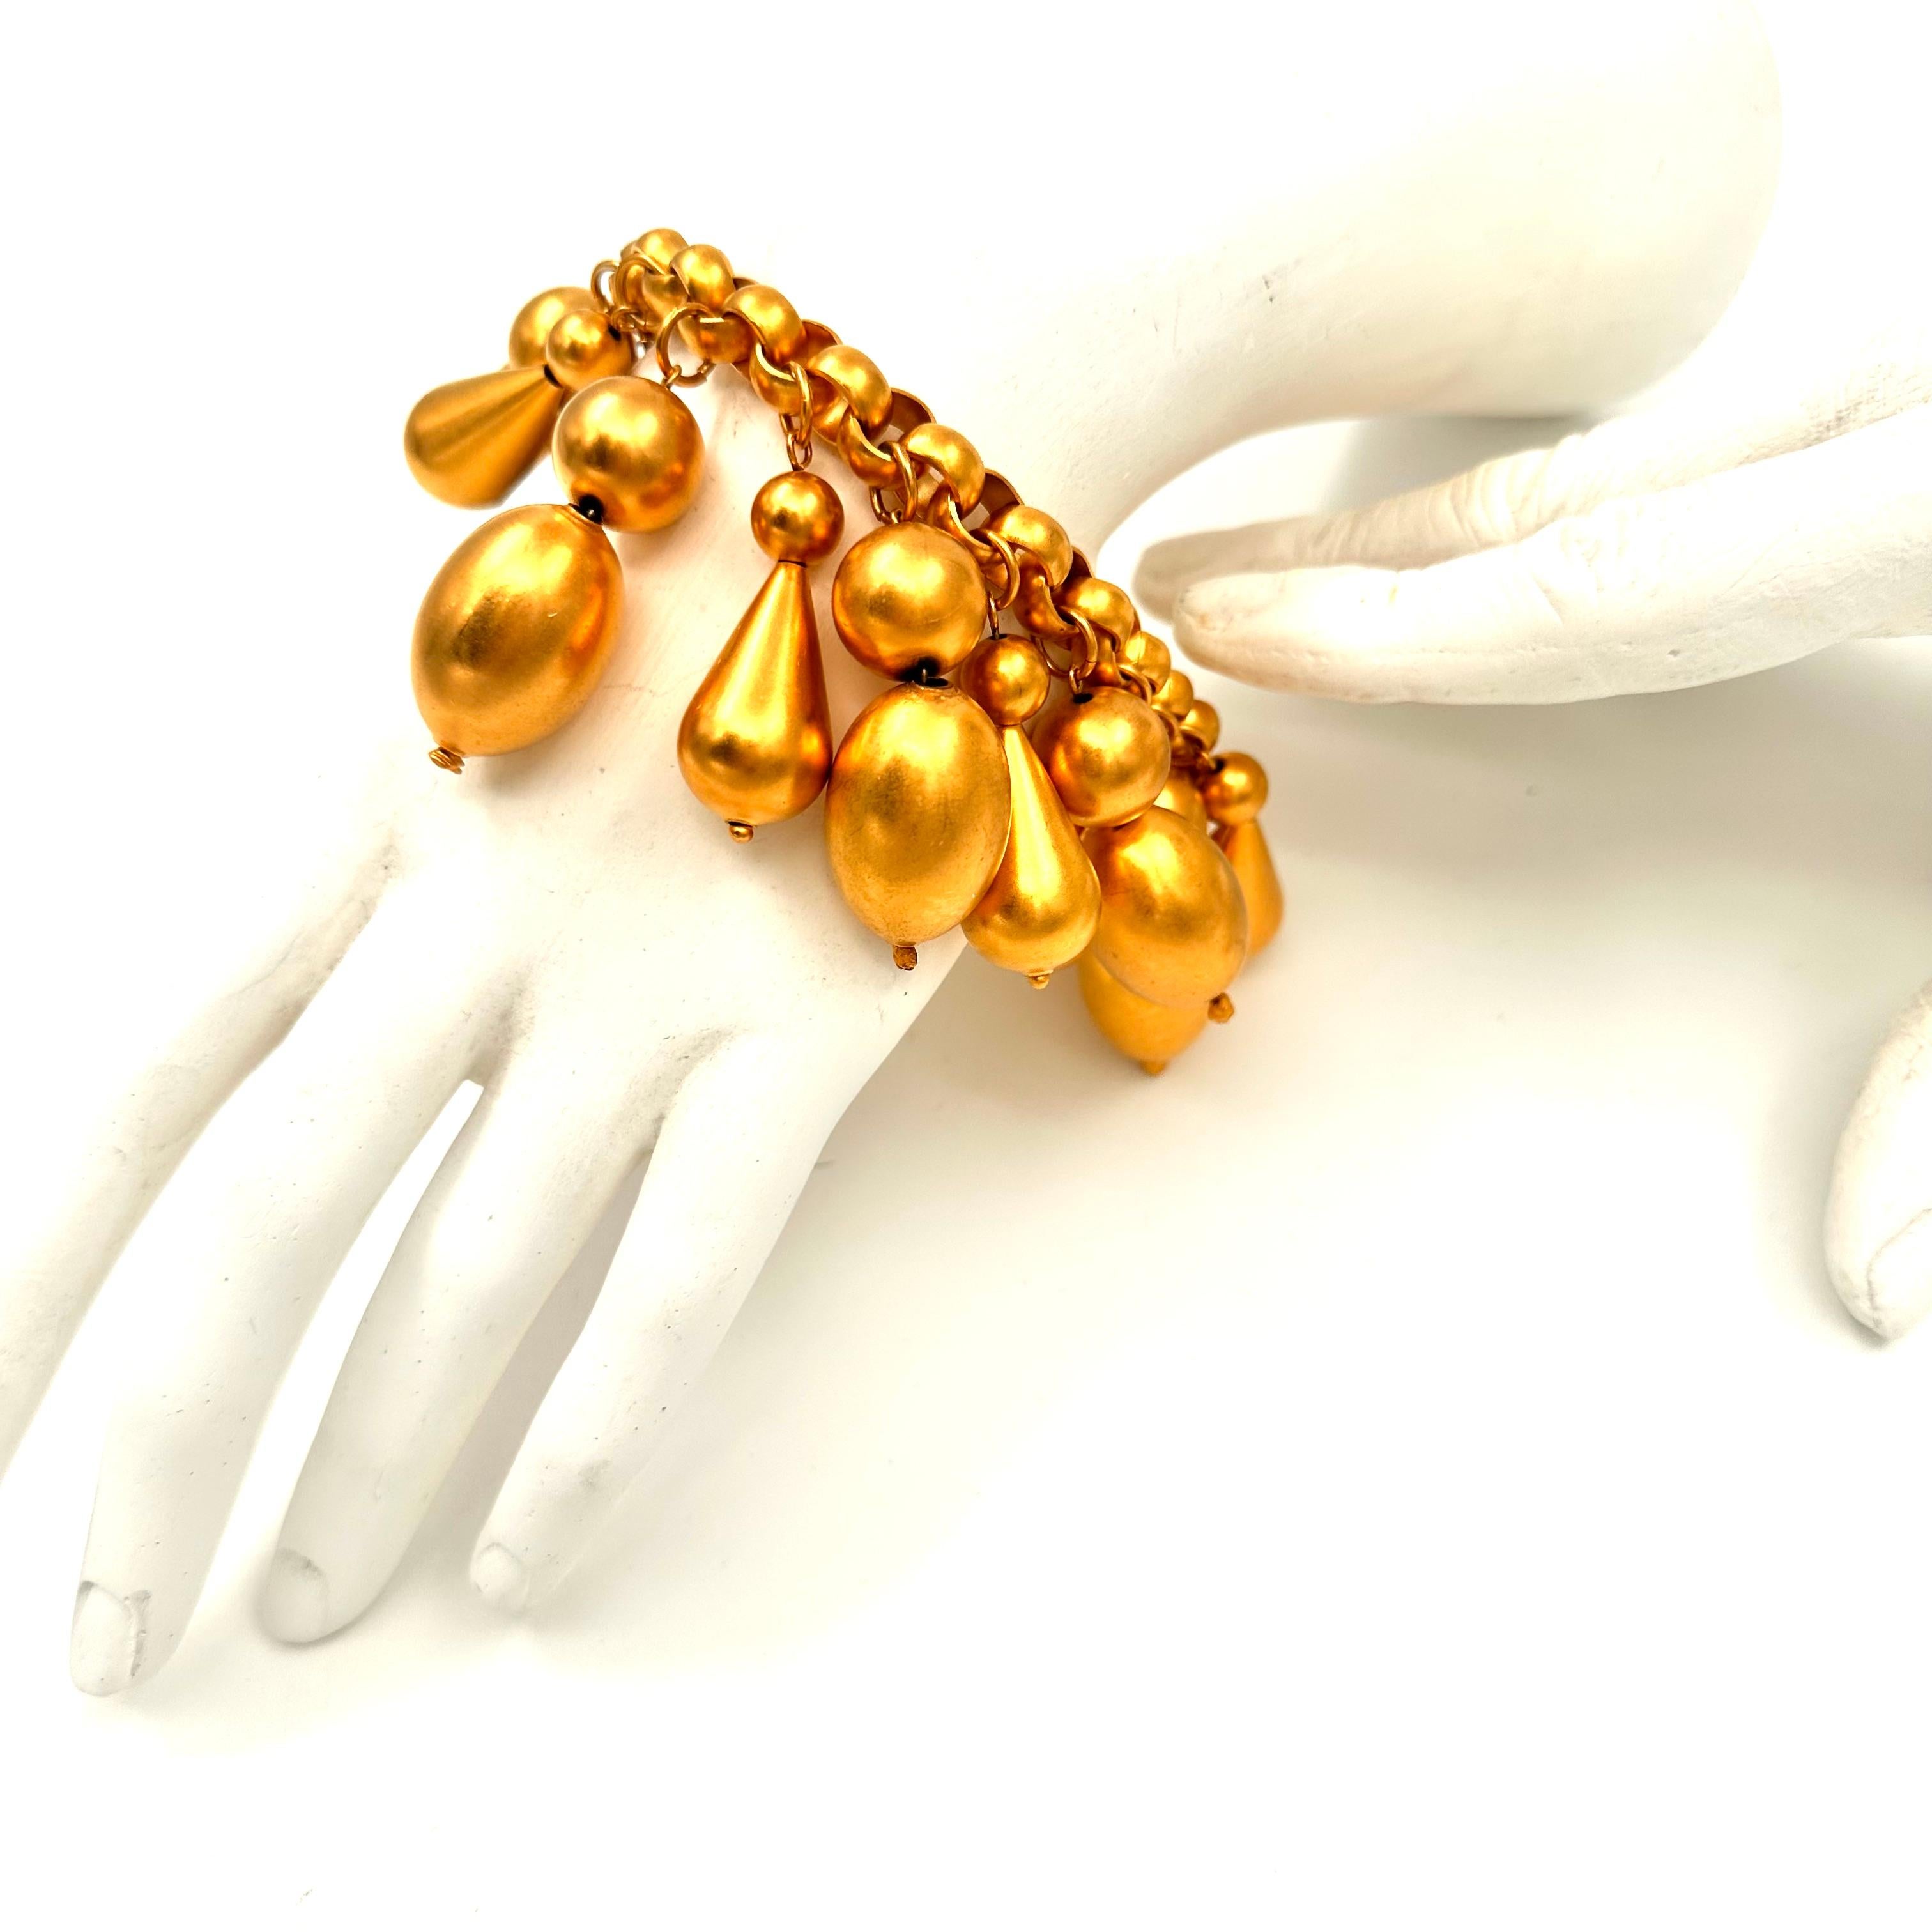 Robert Lee Morris Runway Collection All Gold Charm Bracelet for Donna Karan, created for a resort show in 1987. This spectacular runway bauble, is a splash of gold bubbles, large and dangling off a wide roll chain bracelet. the gold plated brass is